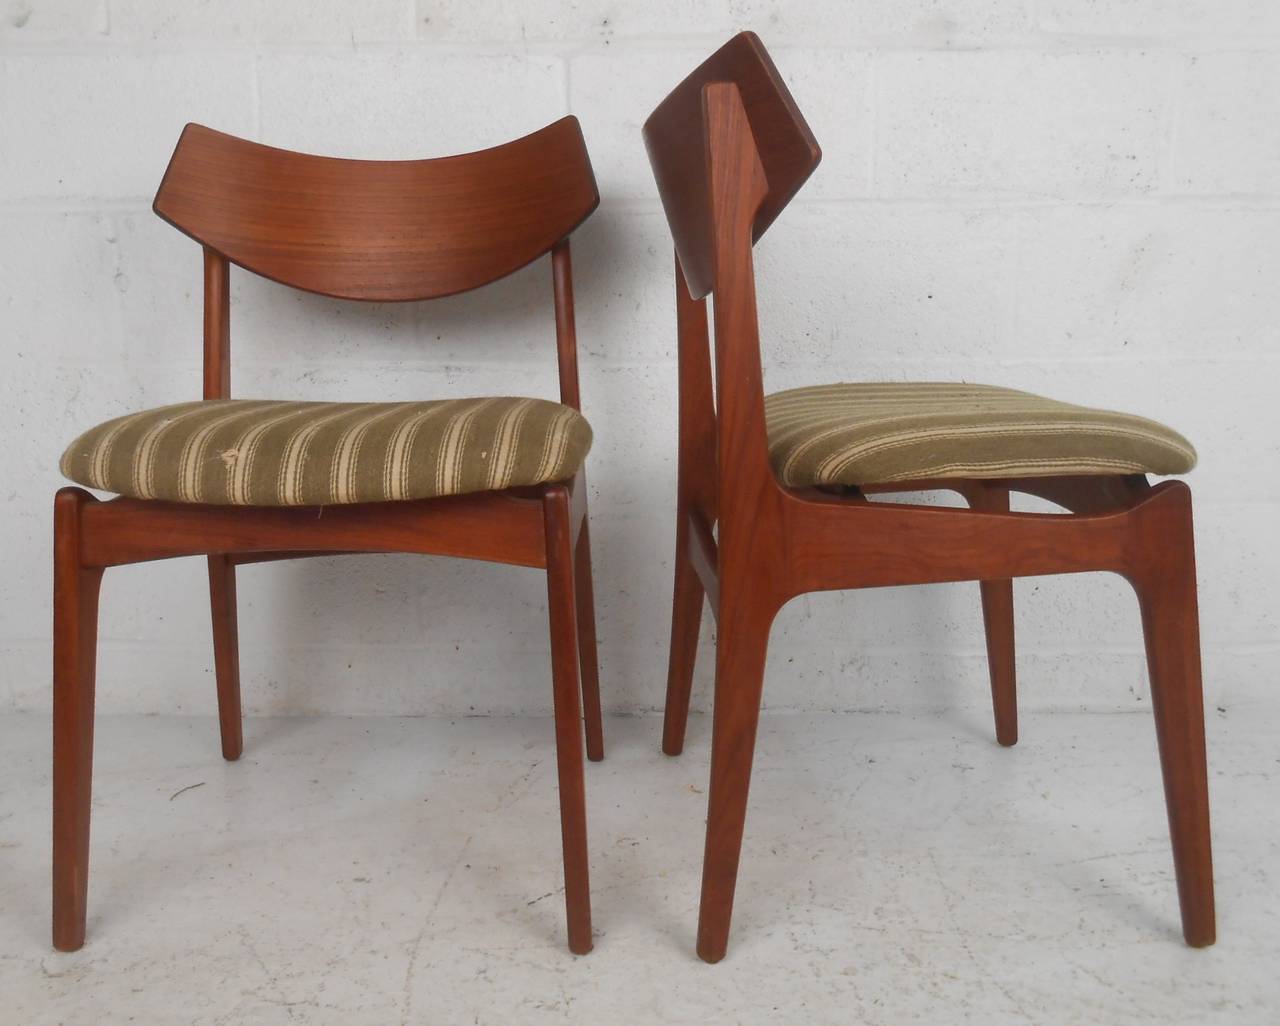 Set of four mid-century modern teak dining chairs with bent-ply backrests and solid teak frames. The sculpted back rests, thick padded seats, and bowtie shaped stretchers provide sturdiness and maximum comfort in any seating arrangement. Please